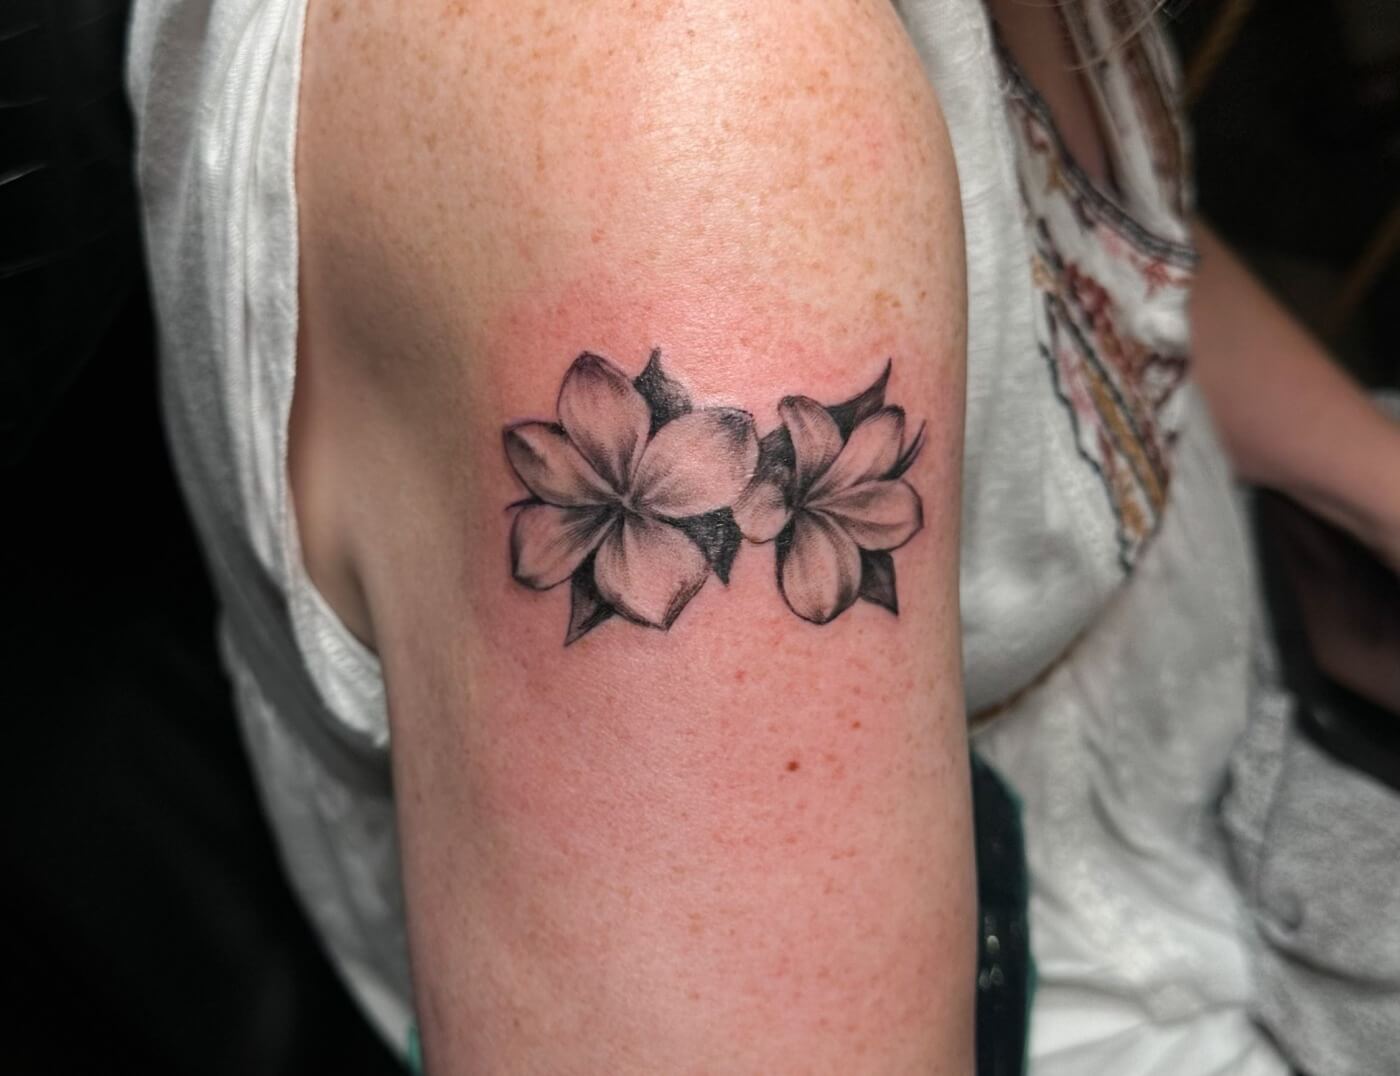 Black & Grey Apple Blossom Floral Tattoo By Choze At Iron Palm Tattoos. Call 404-973-7828 for a free consultation with Choze. We're open late night until 2AM most nights. Walk ins are welcome.